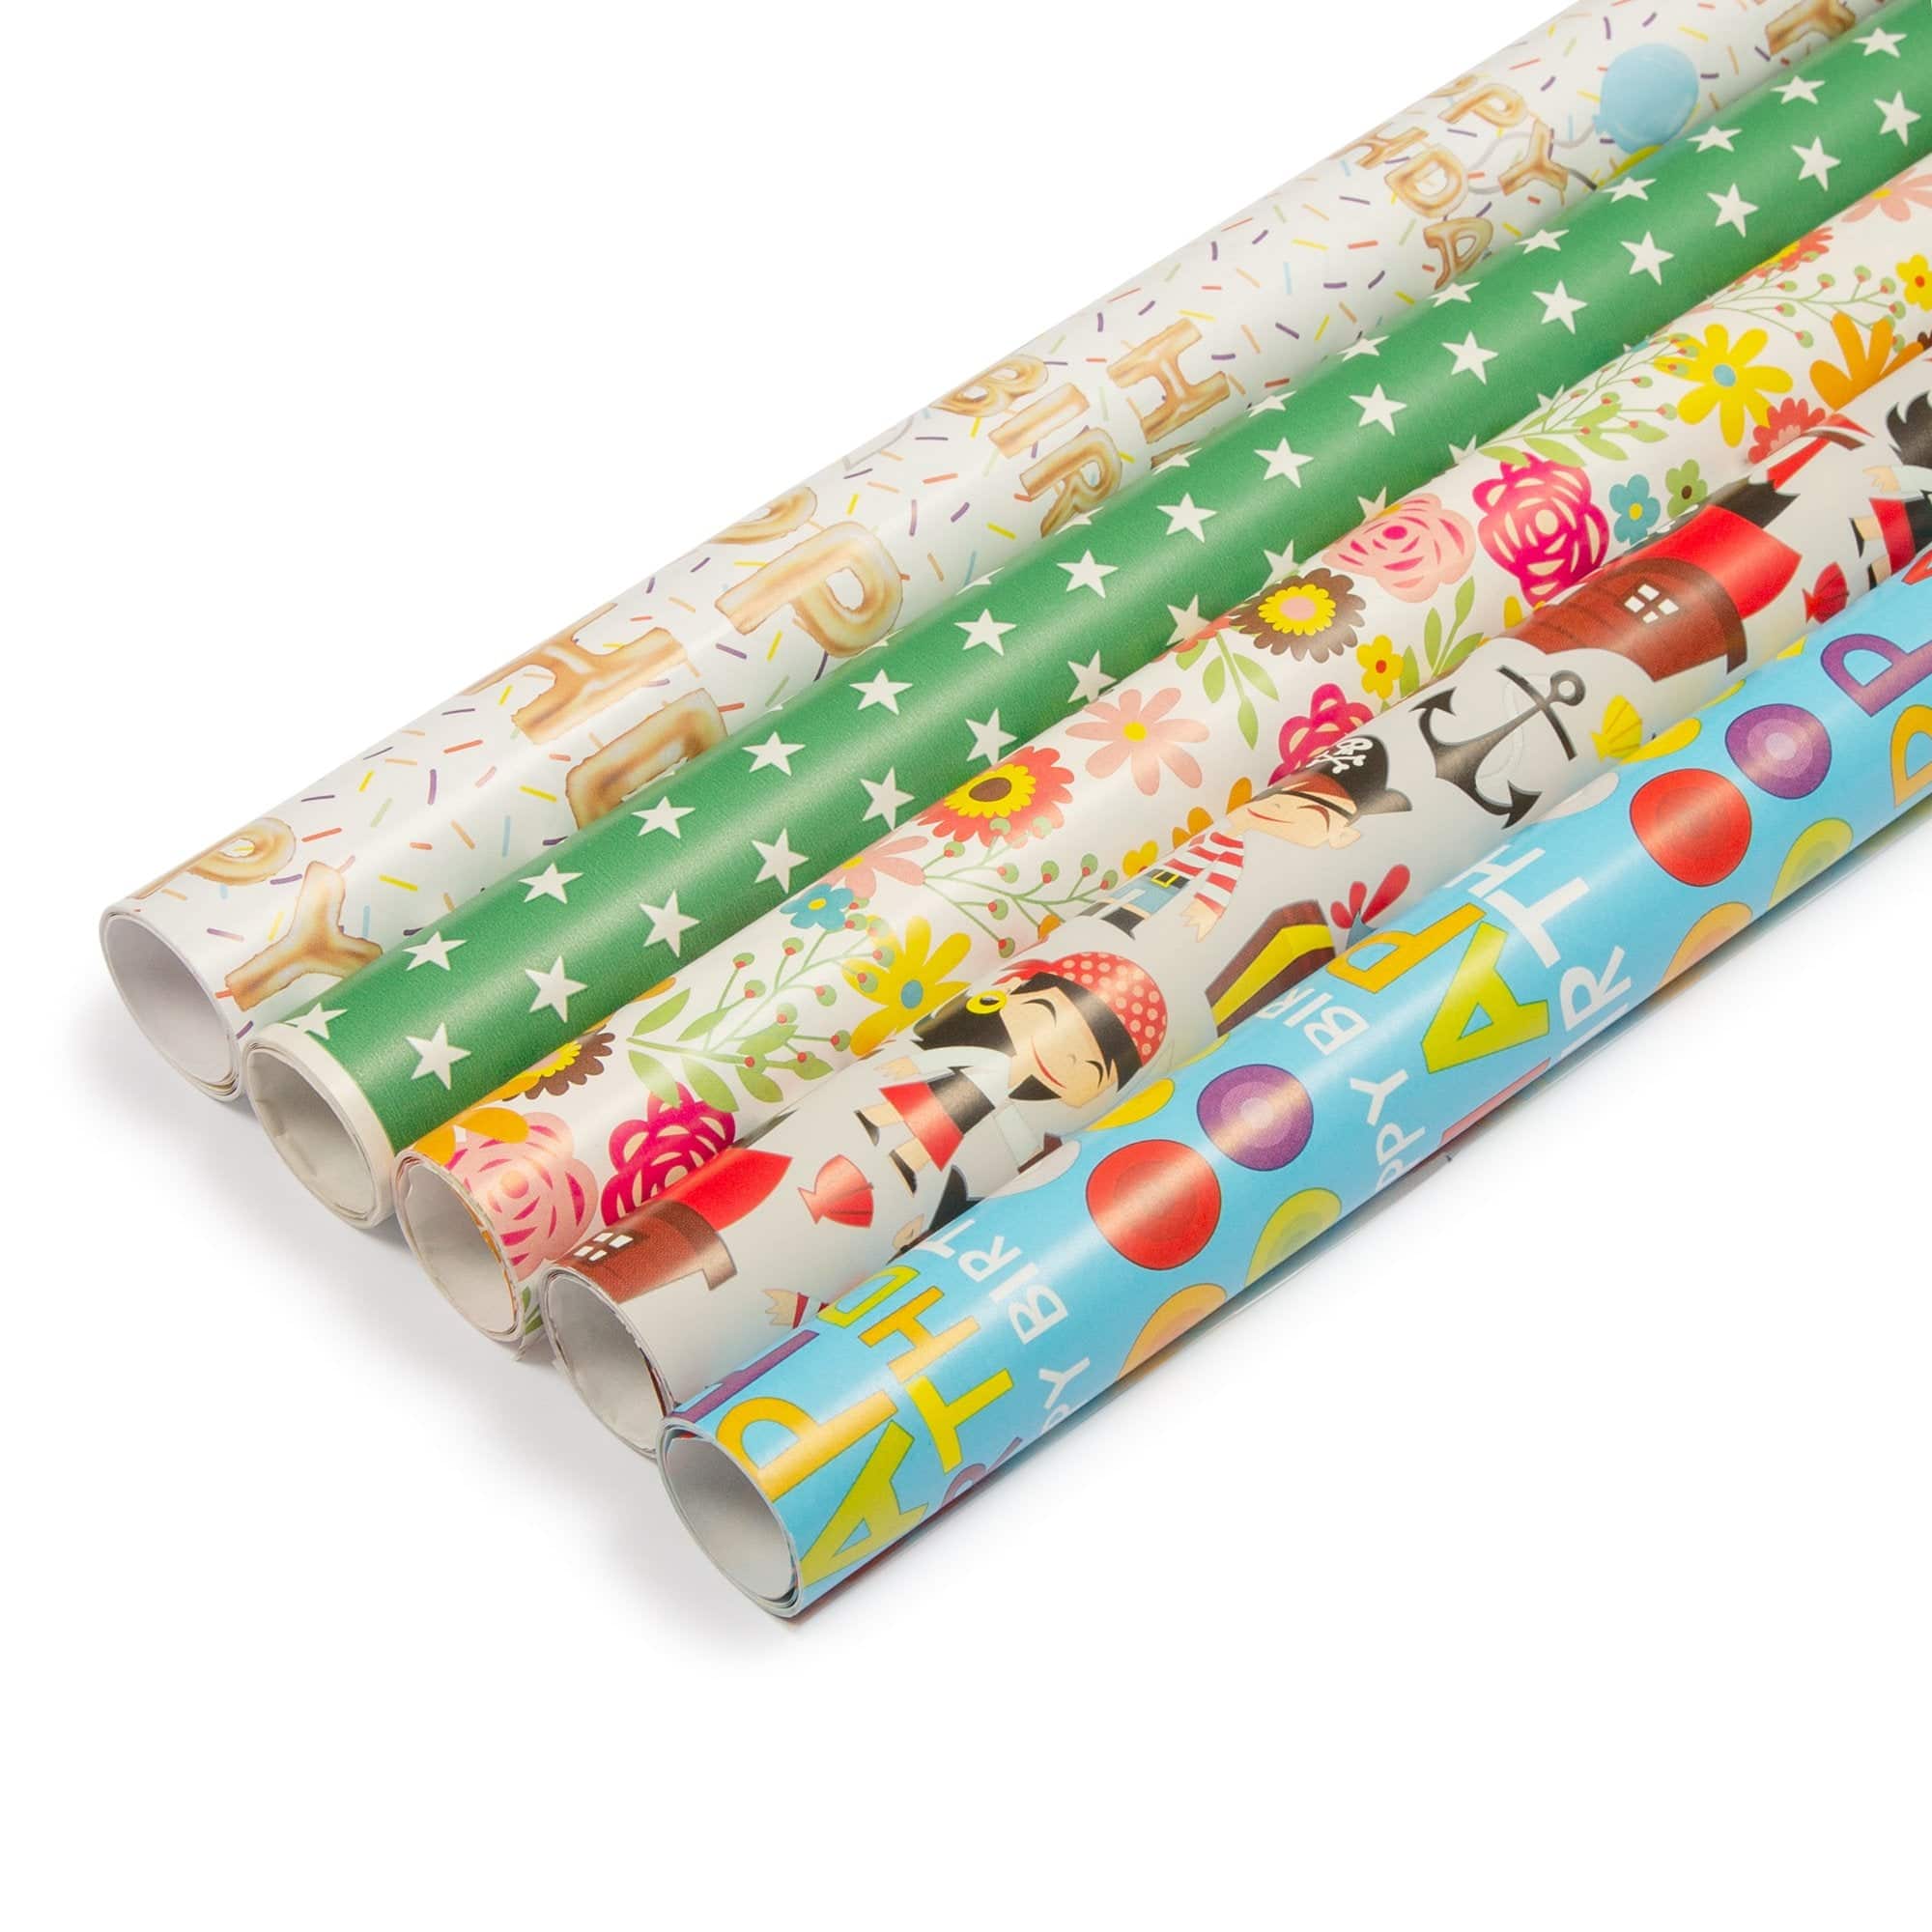 Christmas Wrapping Paper Bundle for Holiday Gift Wrap - Kraft Brown with  Red Green Plaid, Christmas Tree, Holly Berry, Reindeer - Pack of 4 Rolls -  China Tissue Paper, Wrapping Paper | Made-in-China.com